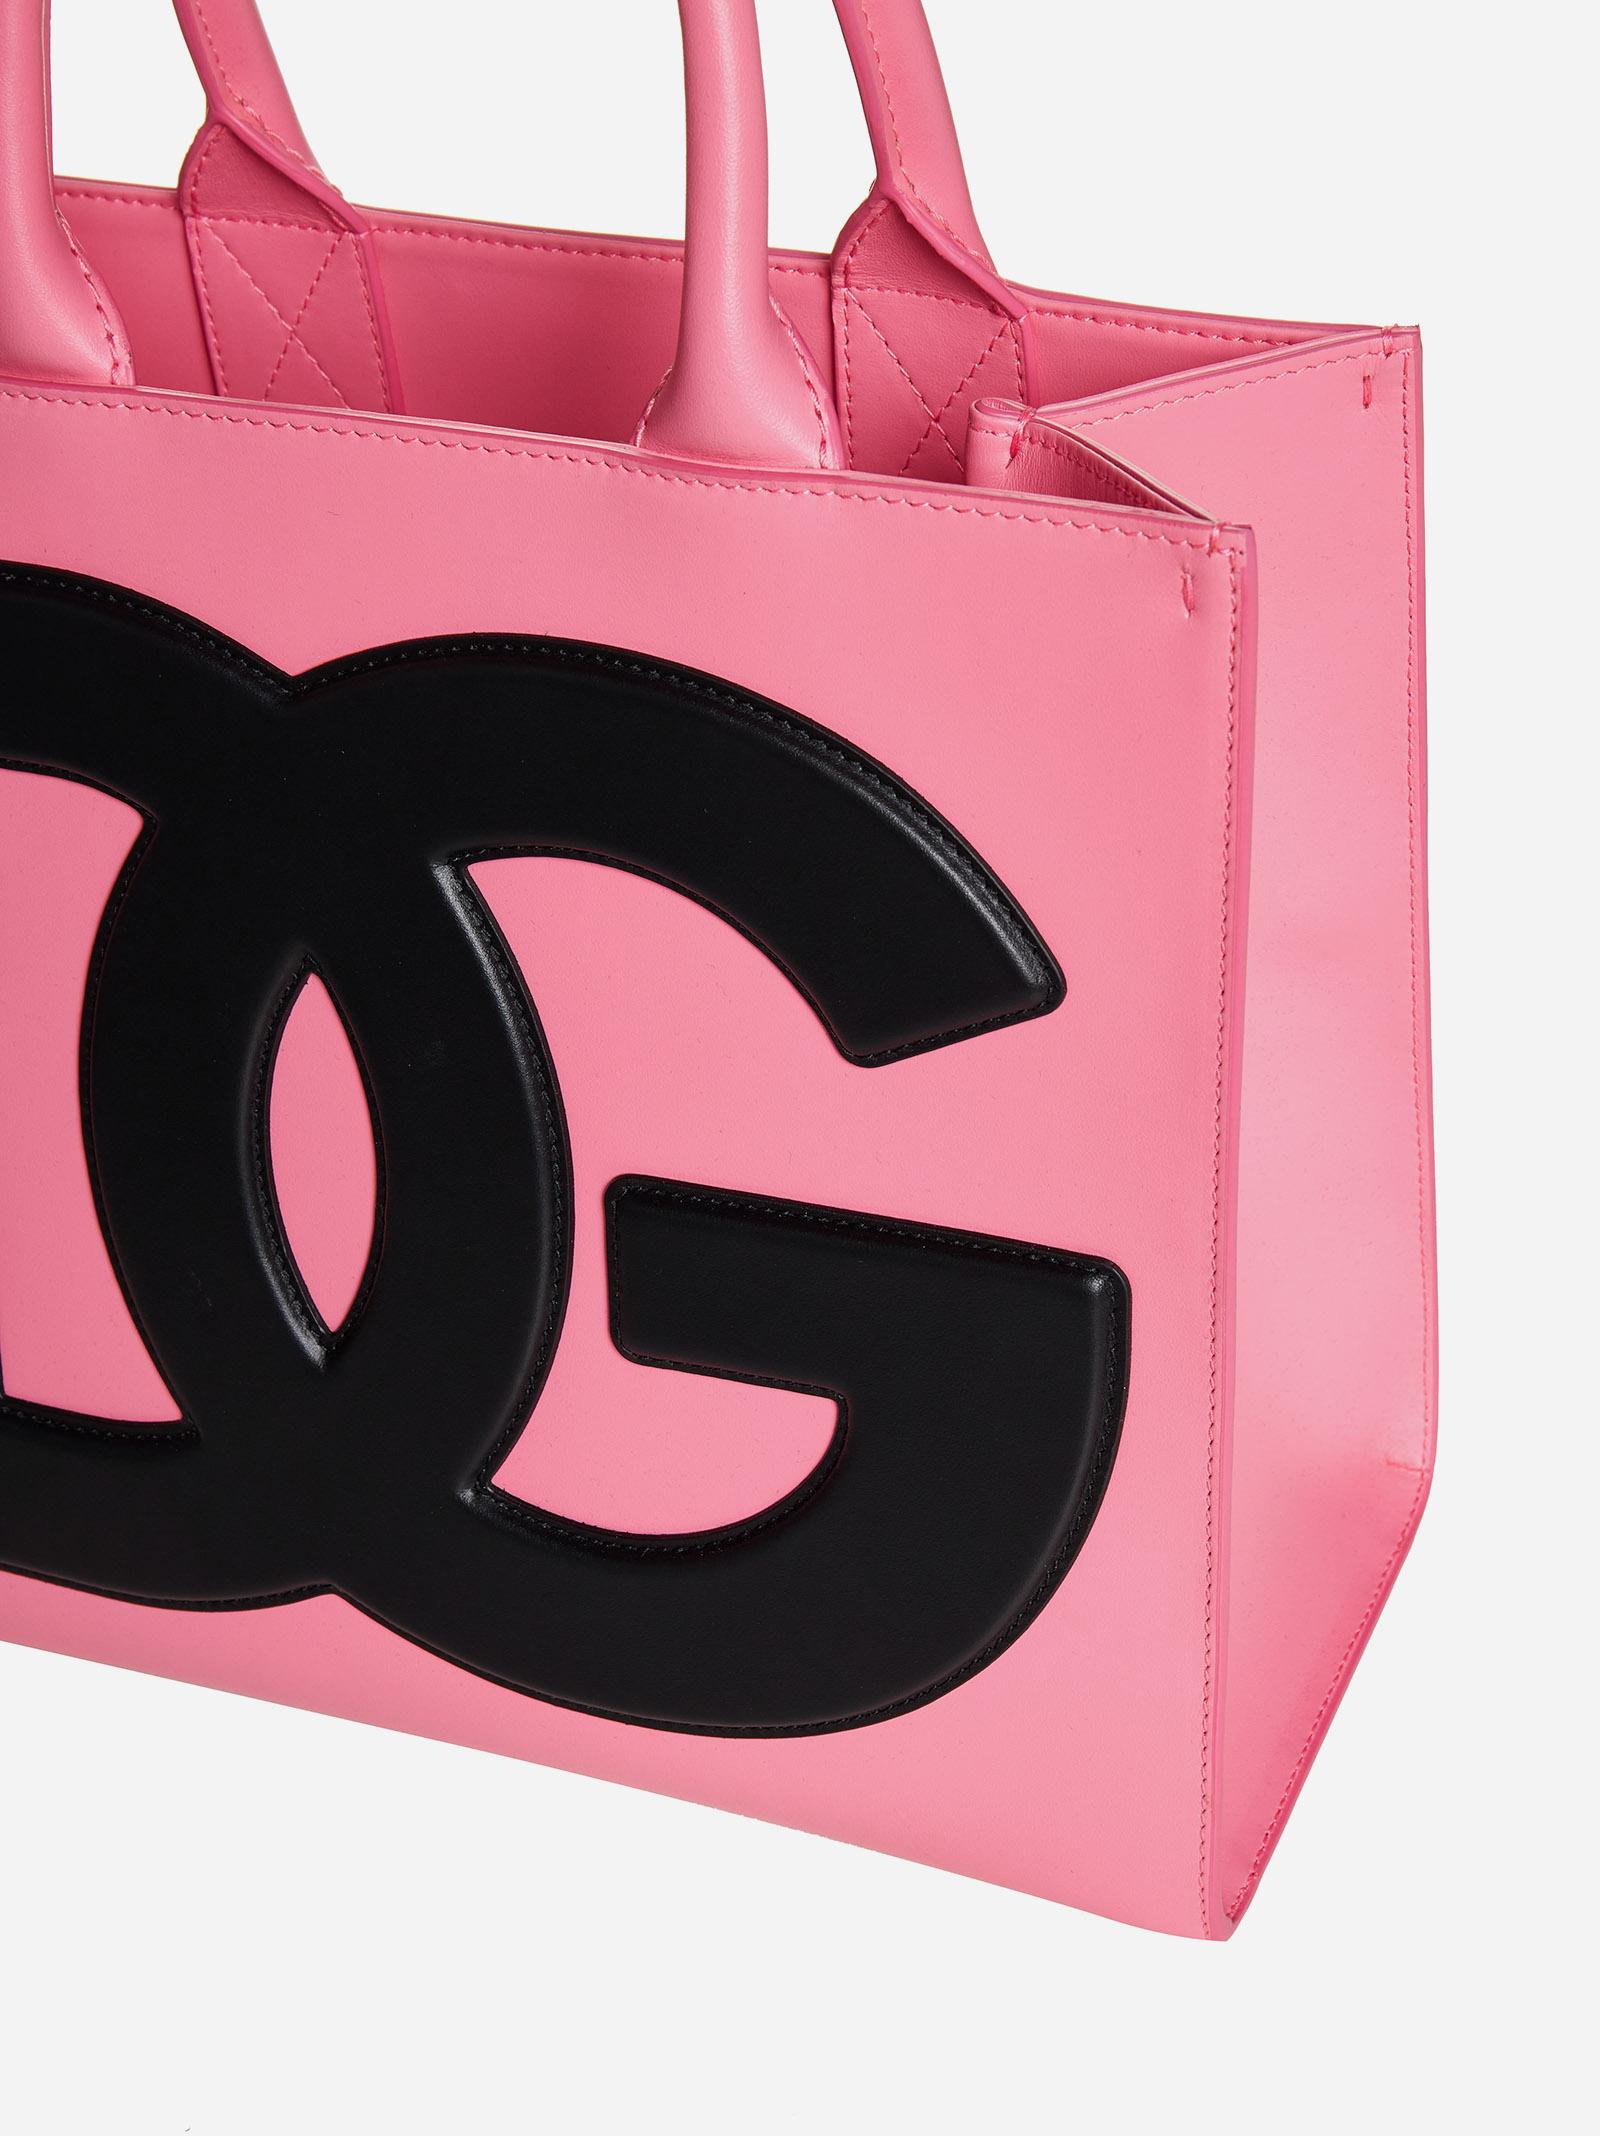 Dolce & Gabbana Dg Logo Leather Tote Bag in Pink